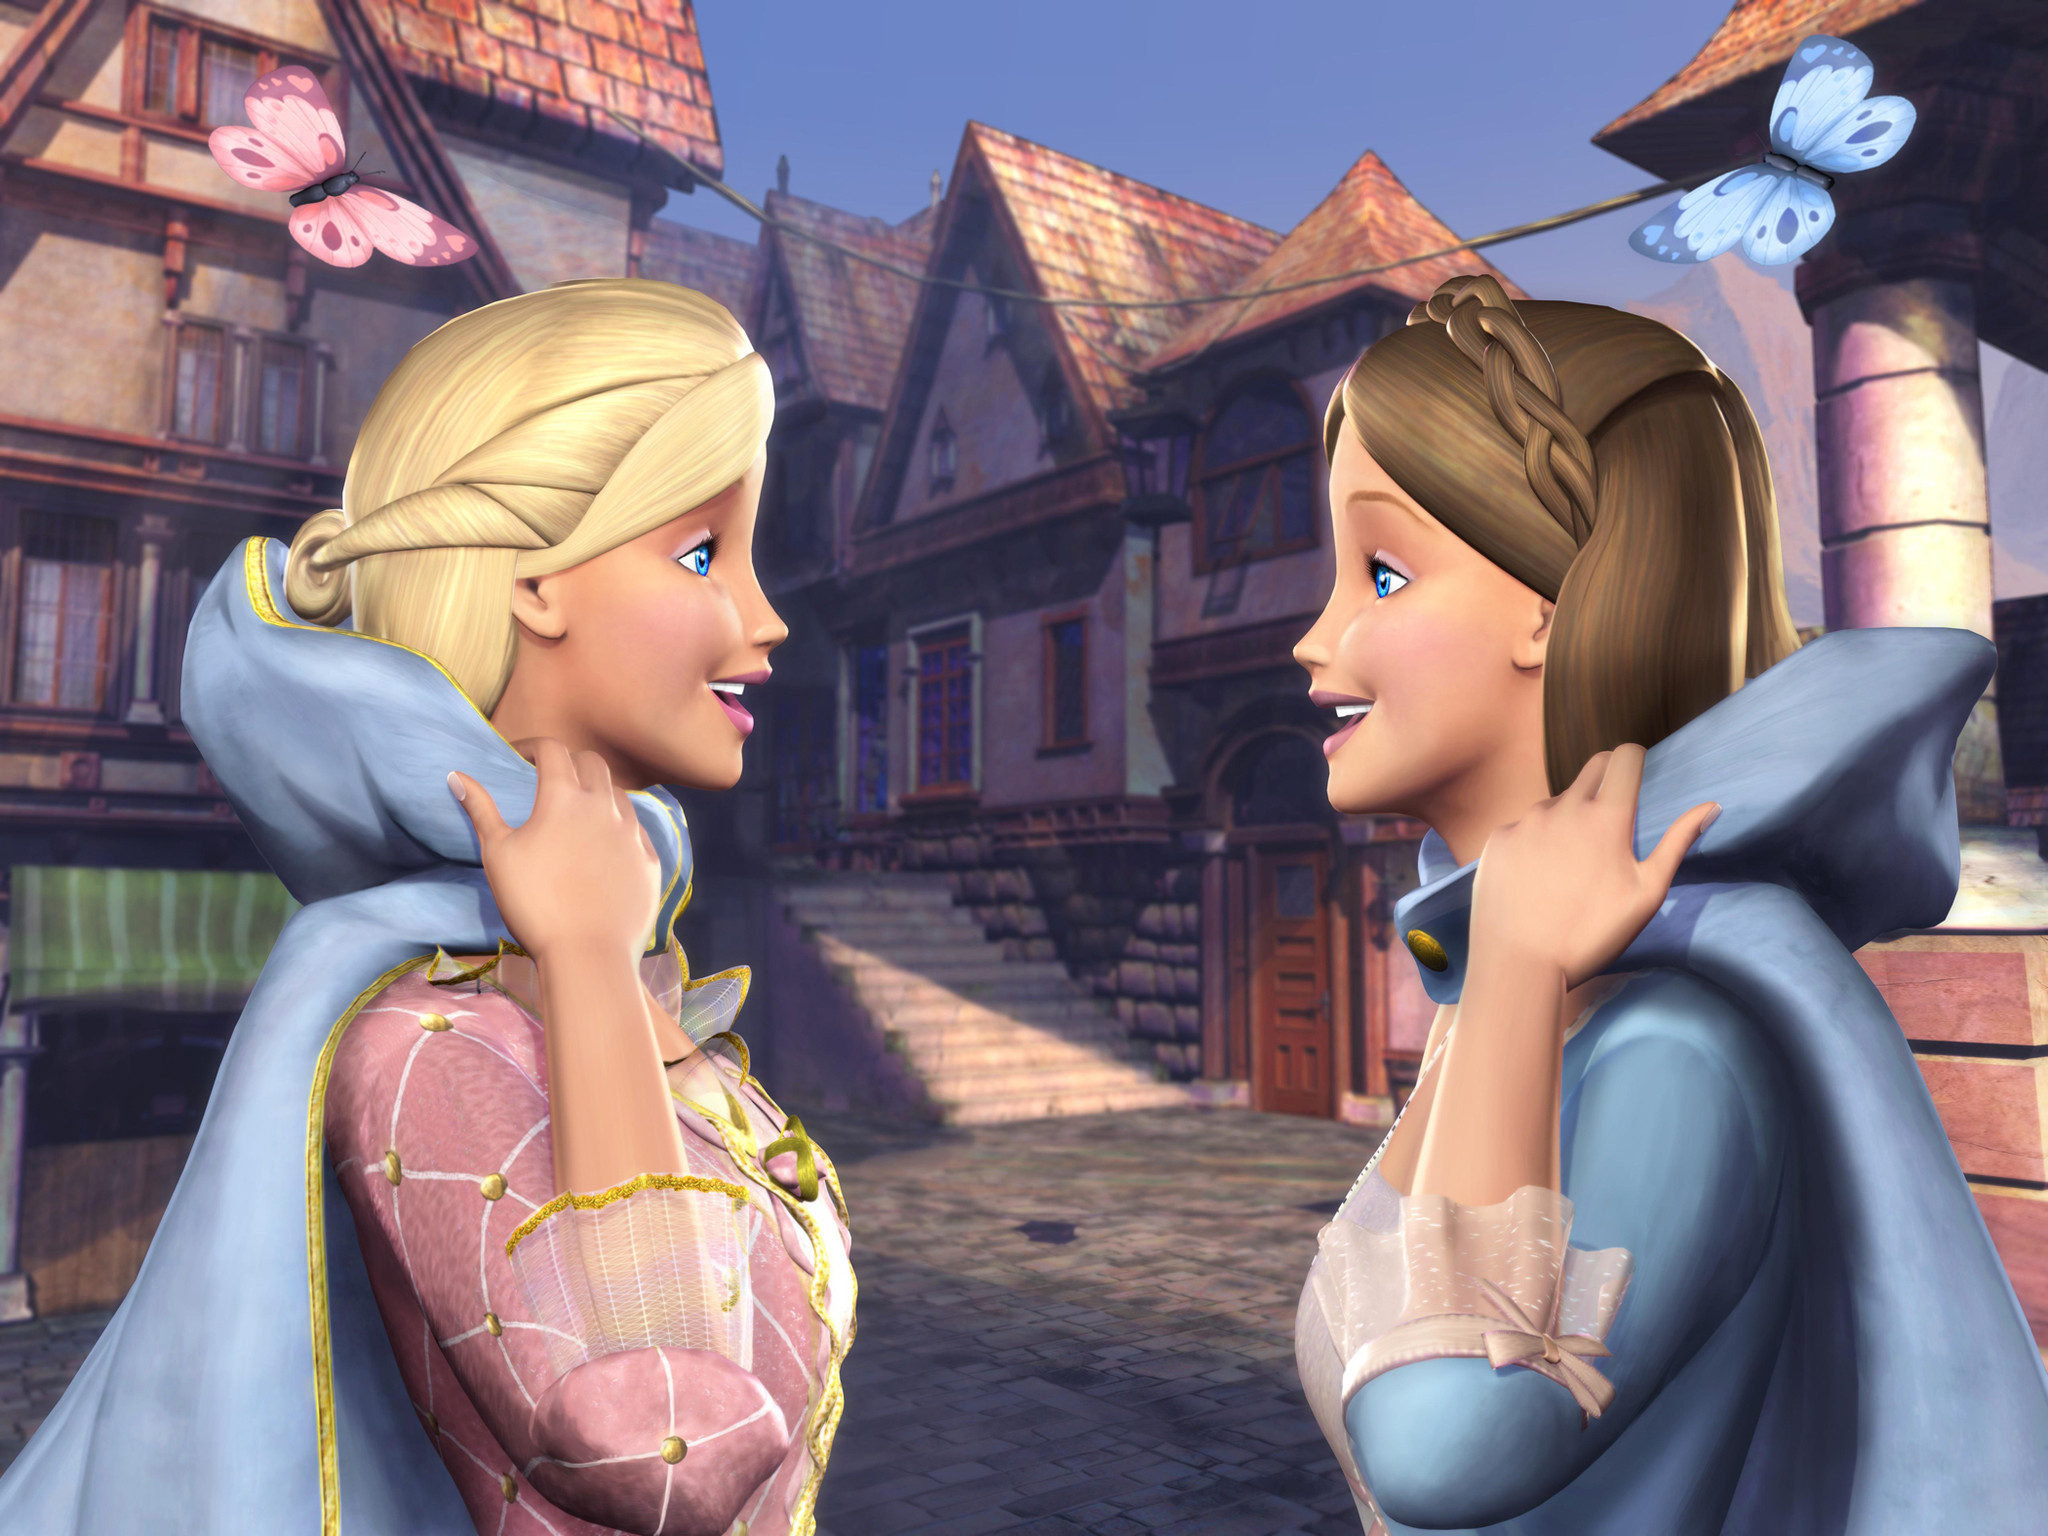 barbie princess and the pauper where to watch